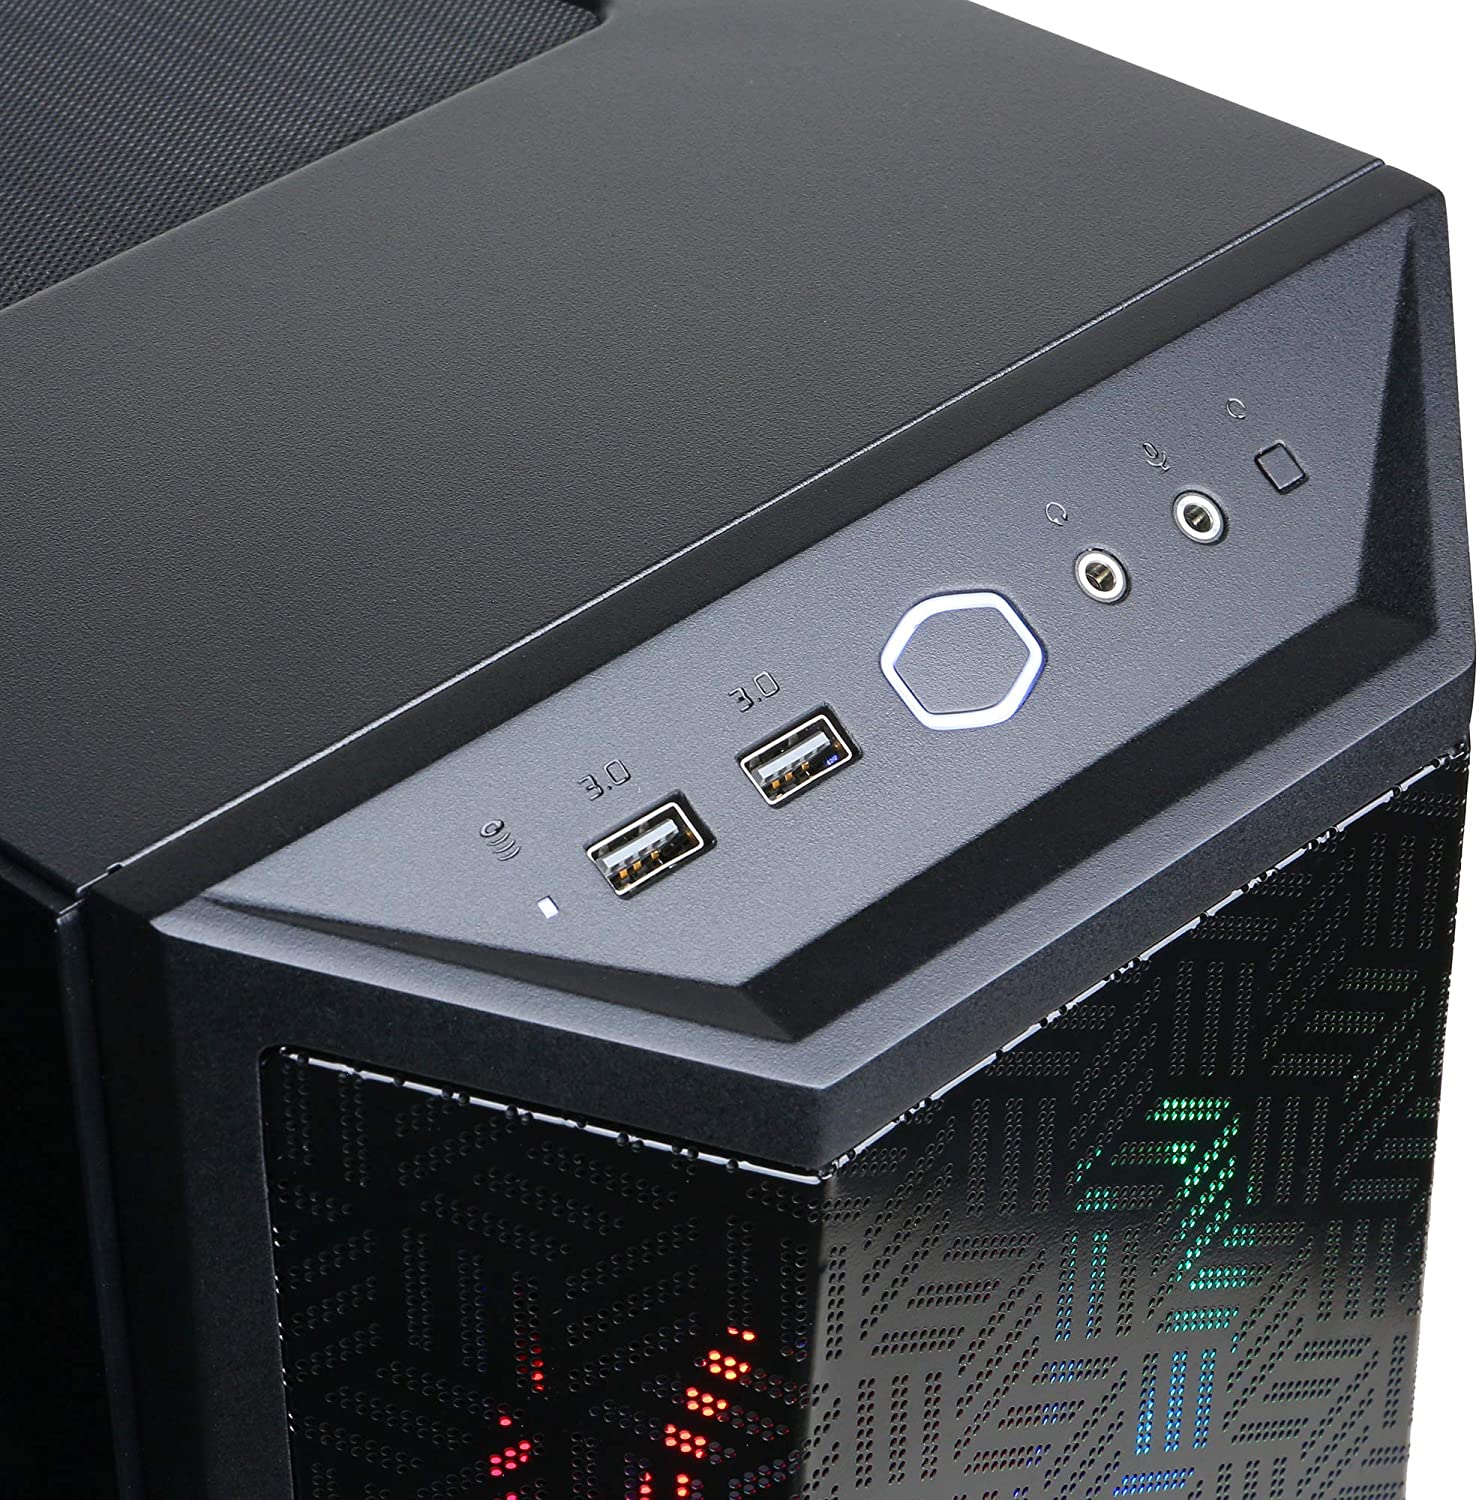 the Benefits of Buying CyberpowerPC Gamer Xtreme VR Gaming PC 